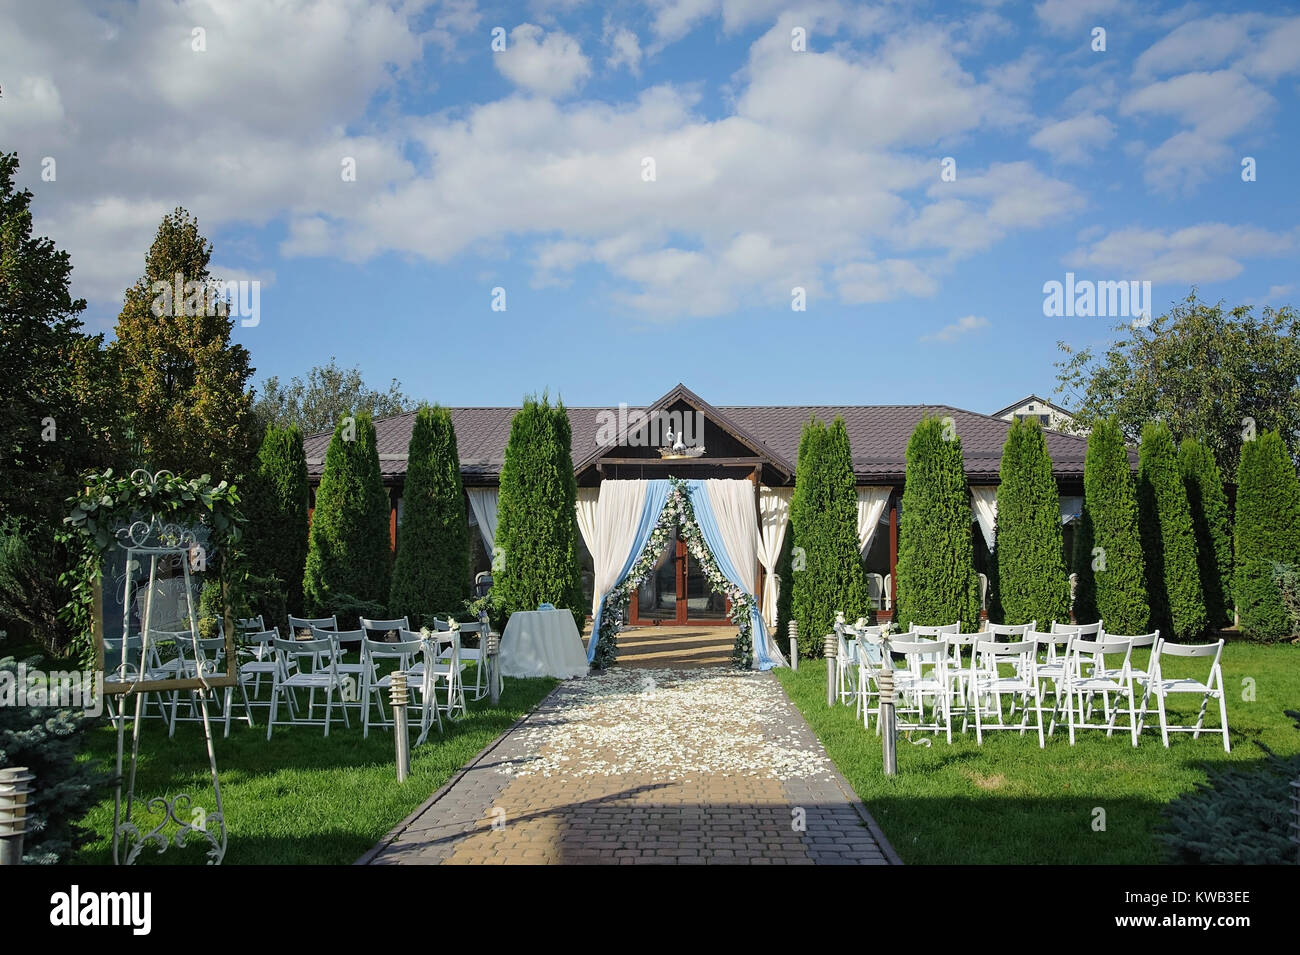 The wedding ceremony in the garden with an arch of green lawn  Rustic Stock Photo